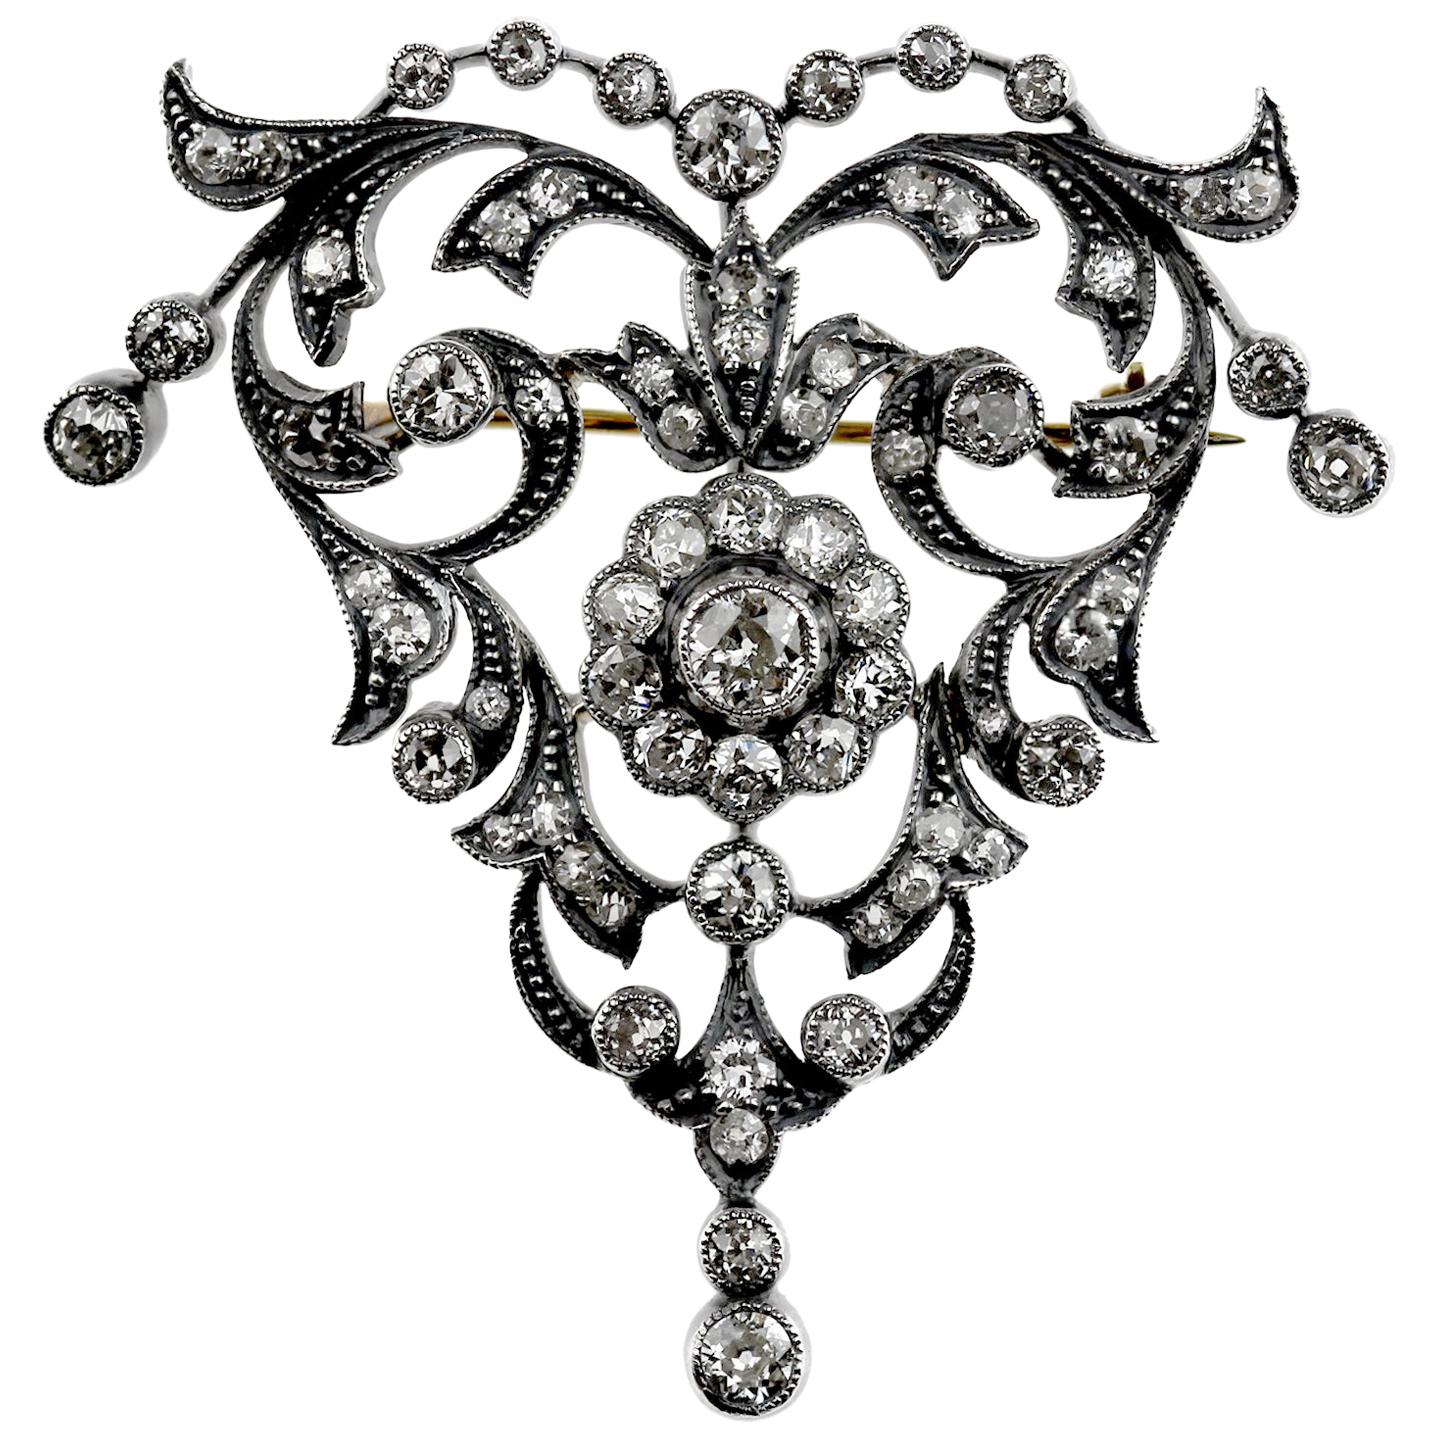 Antique Victorian Brooch with Old European Cut Diamonds in Silver and Gold